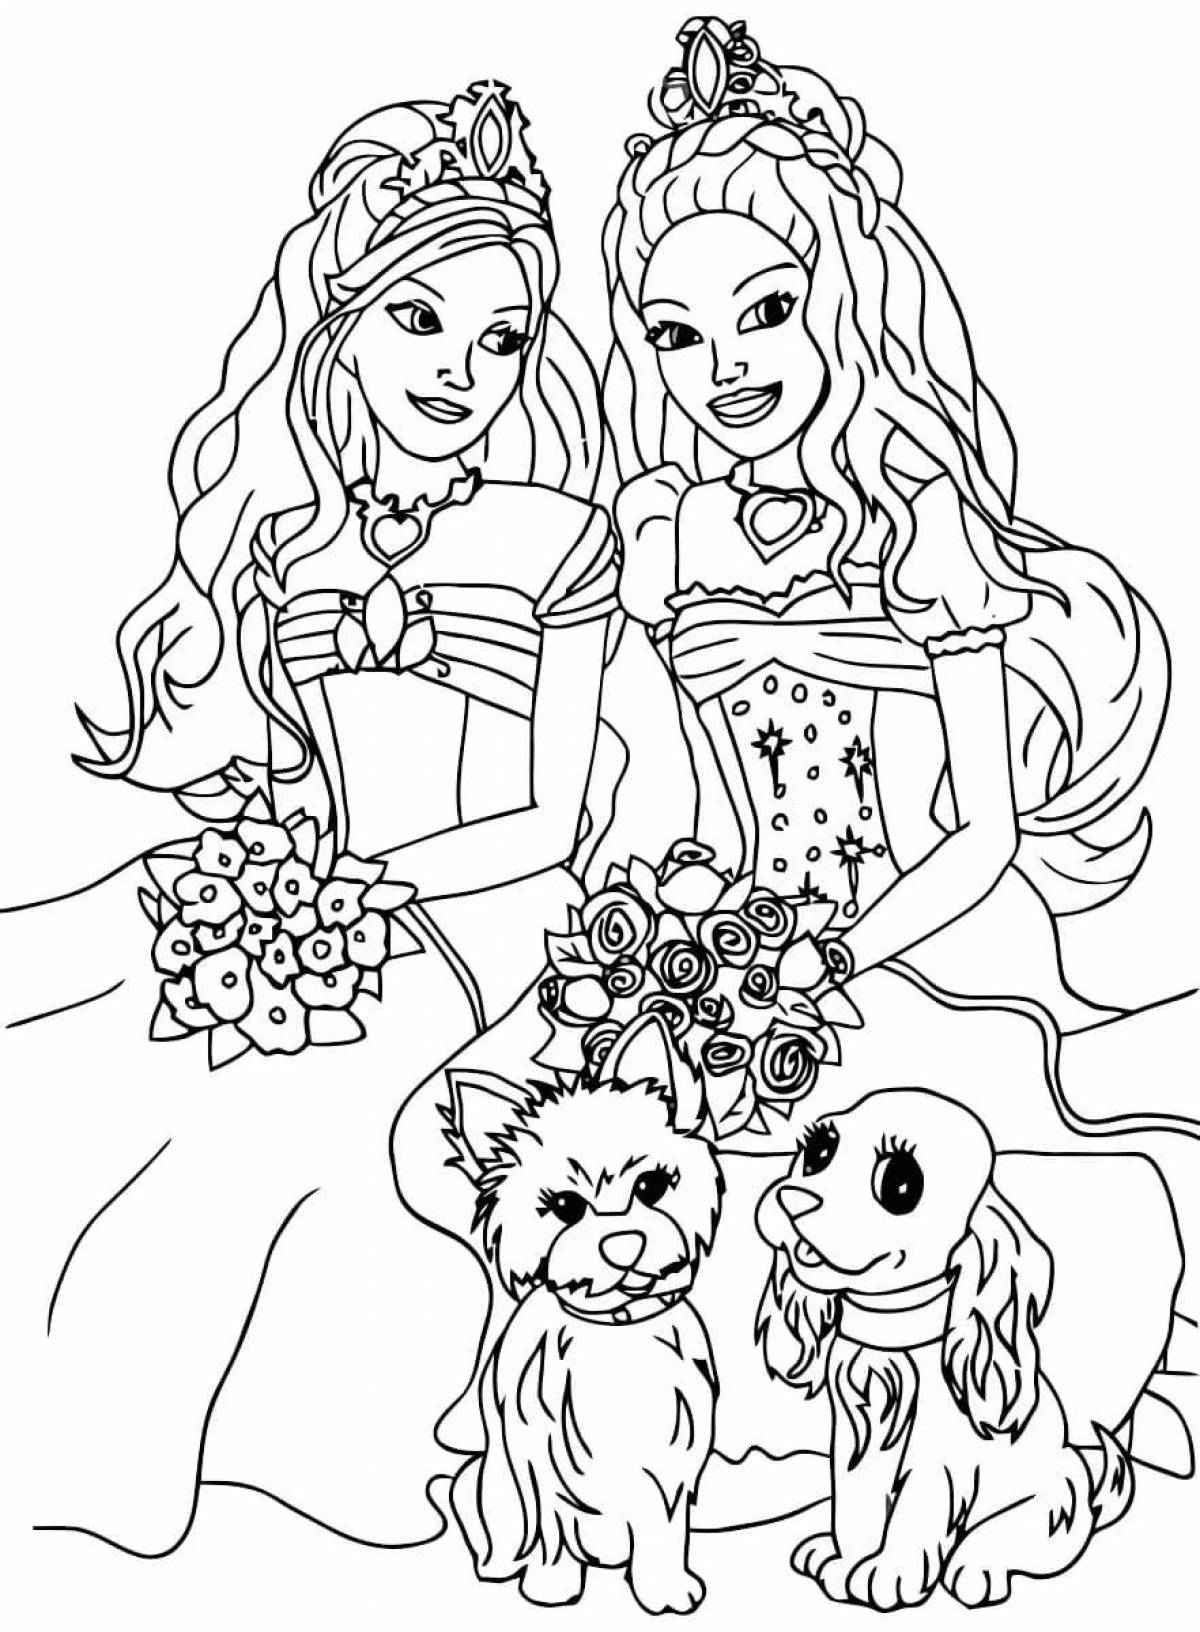 Sparkling coloring book for girls 9-10 years old